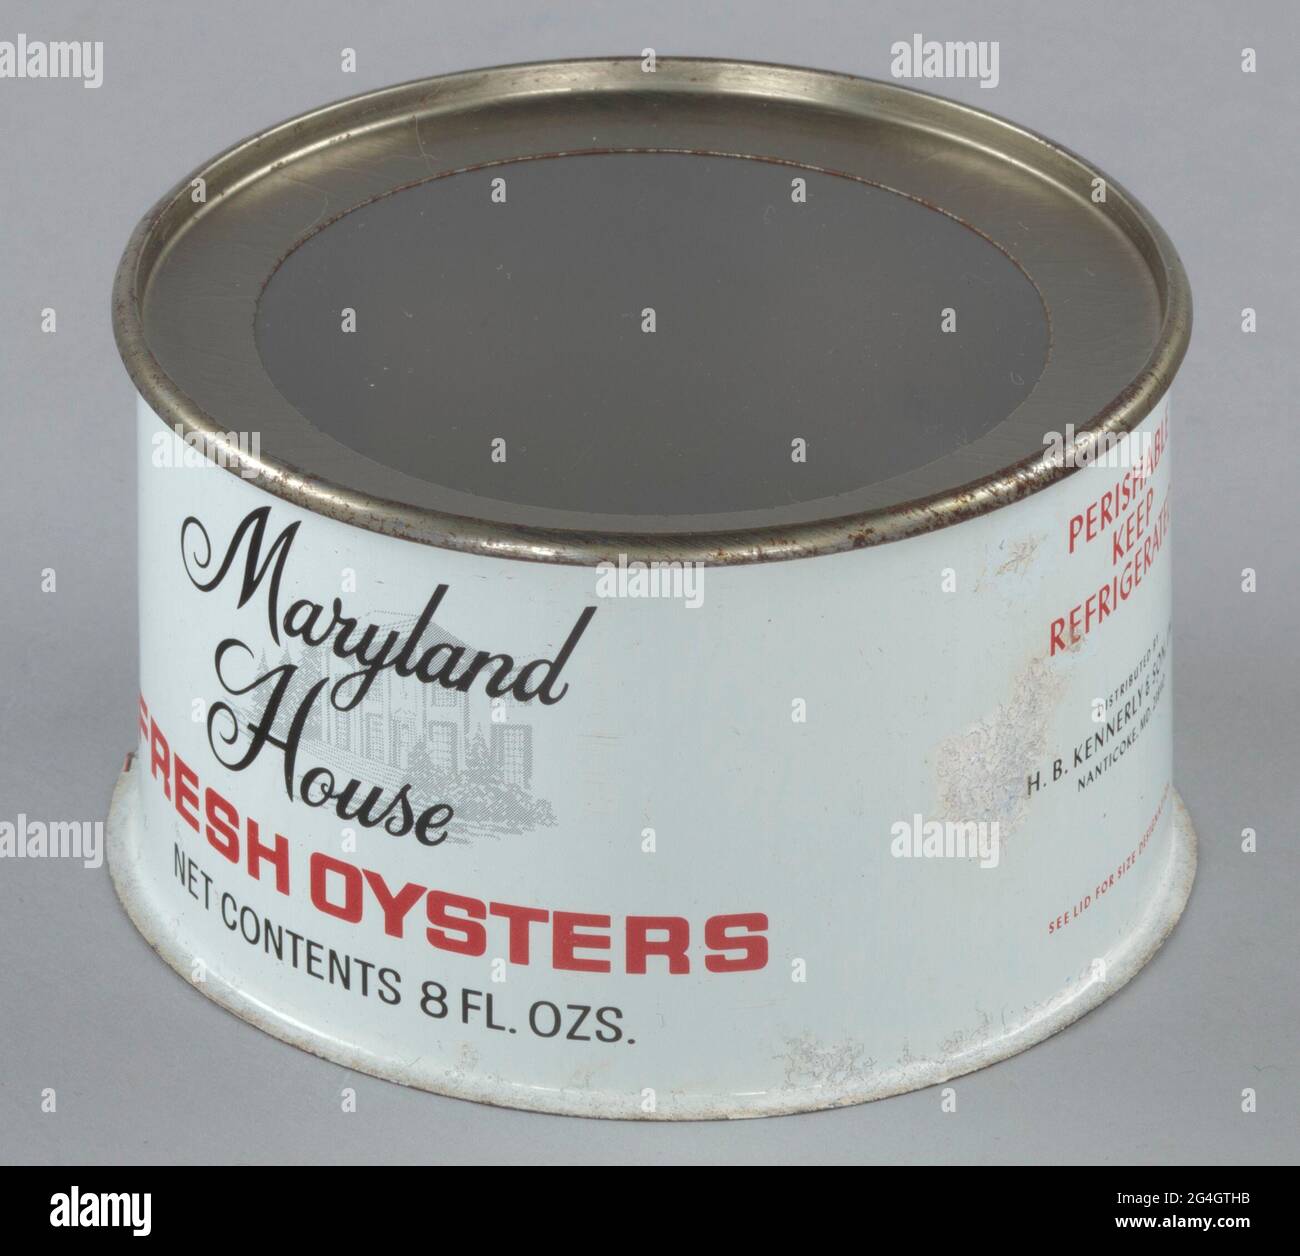 An eight ounce tin can for the Maryland House brand of oysters distributed  by H. B. Kennerly &amp; Son, Inc. The can is white with red and black text.  On the front